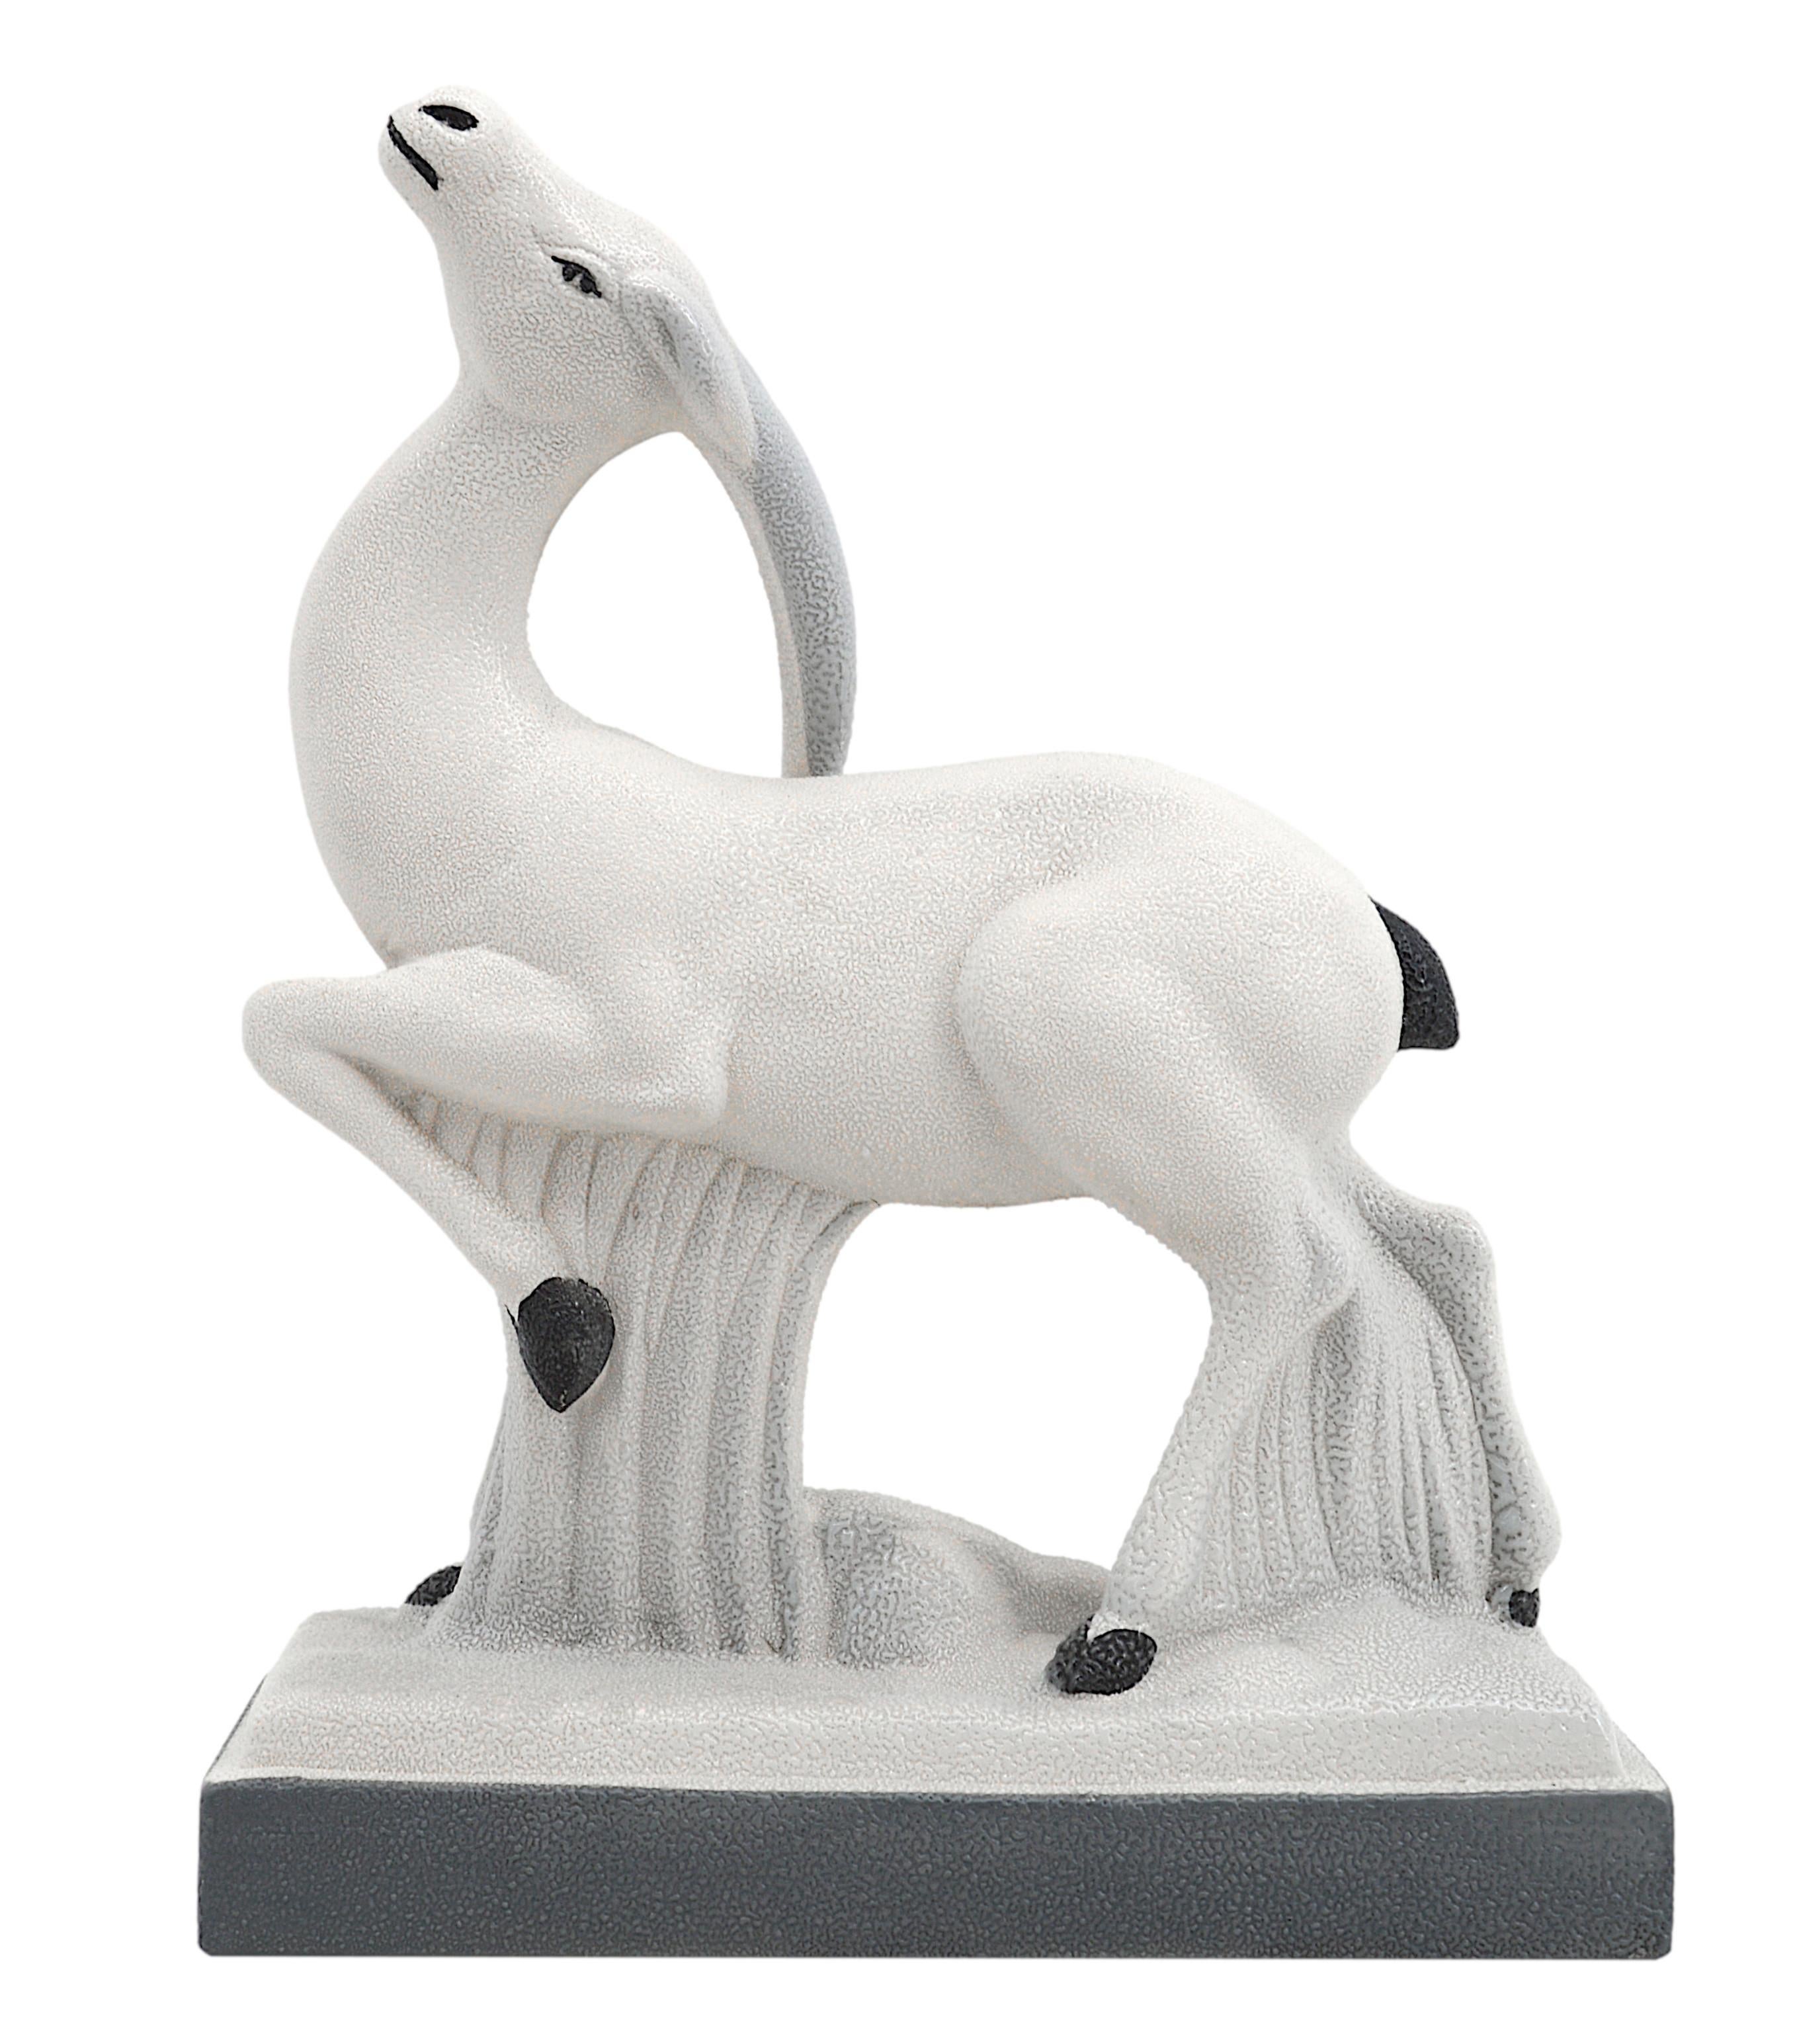 Mid-20th Century Charles Lemanceau French Art Deco Ceramic Antelope, 1930s For Sale